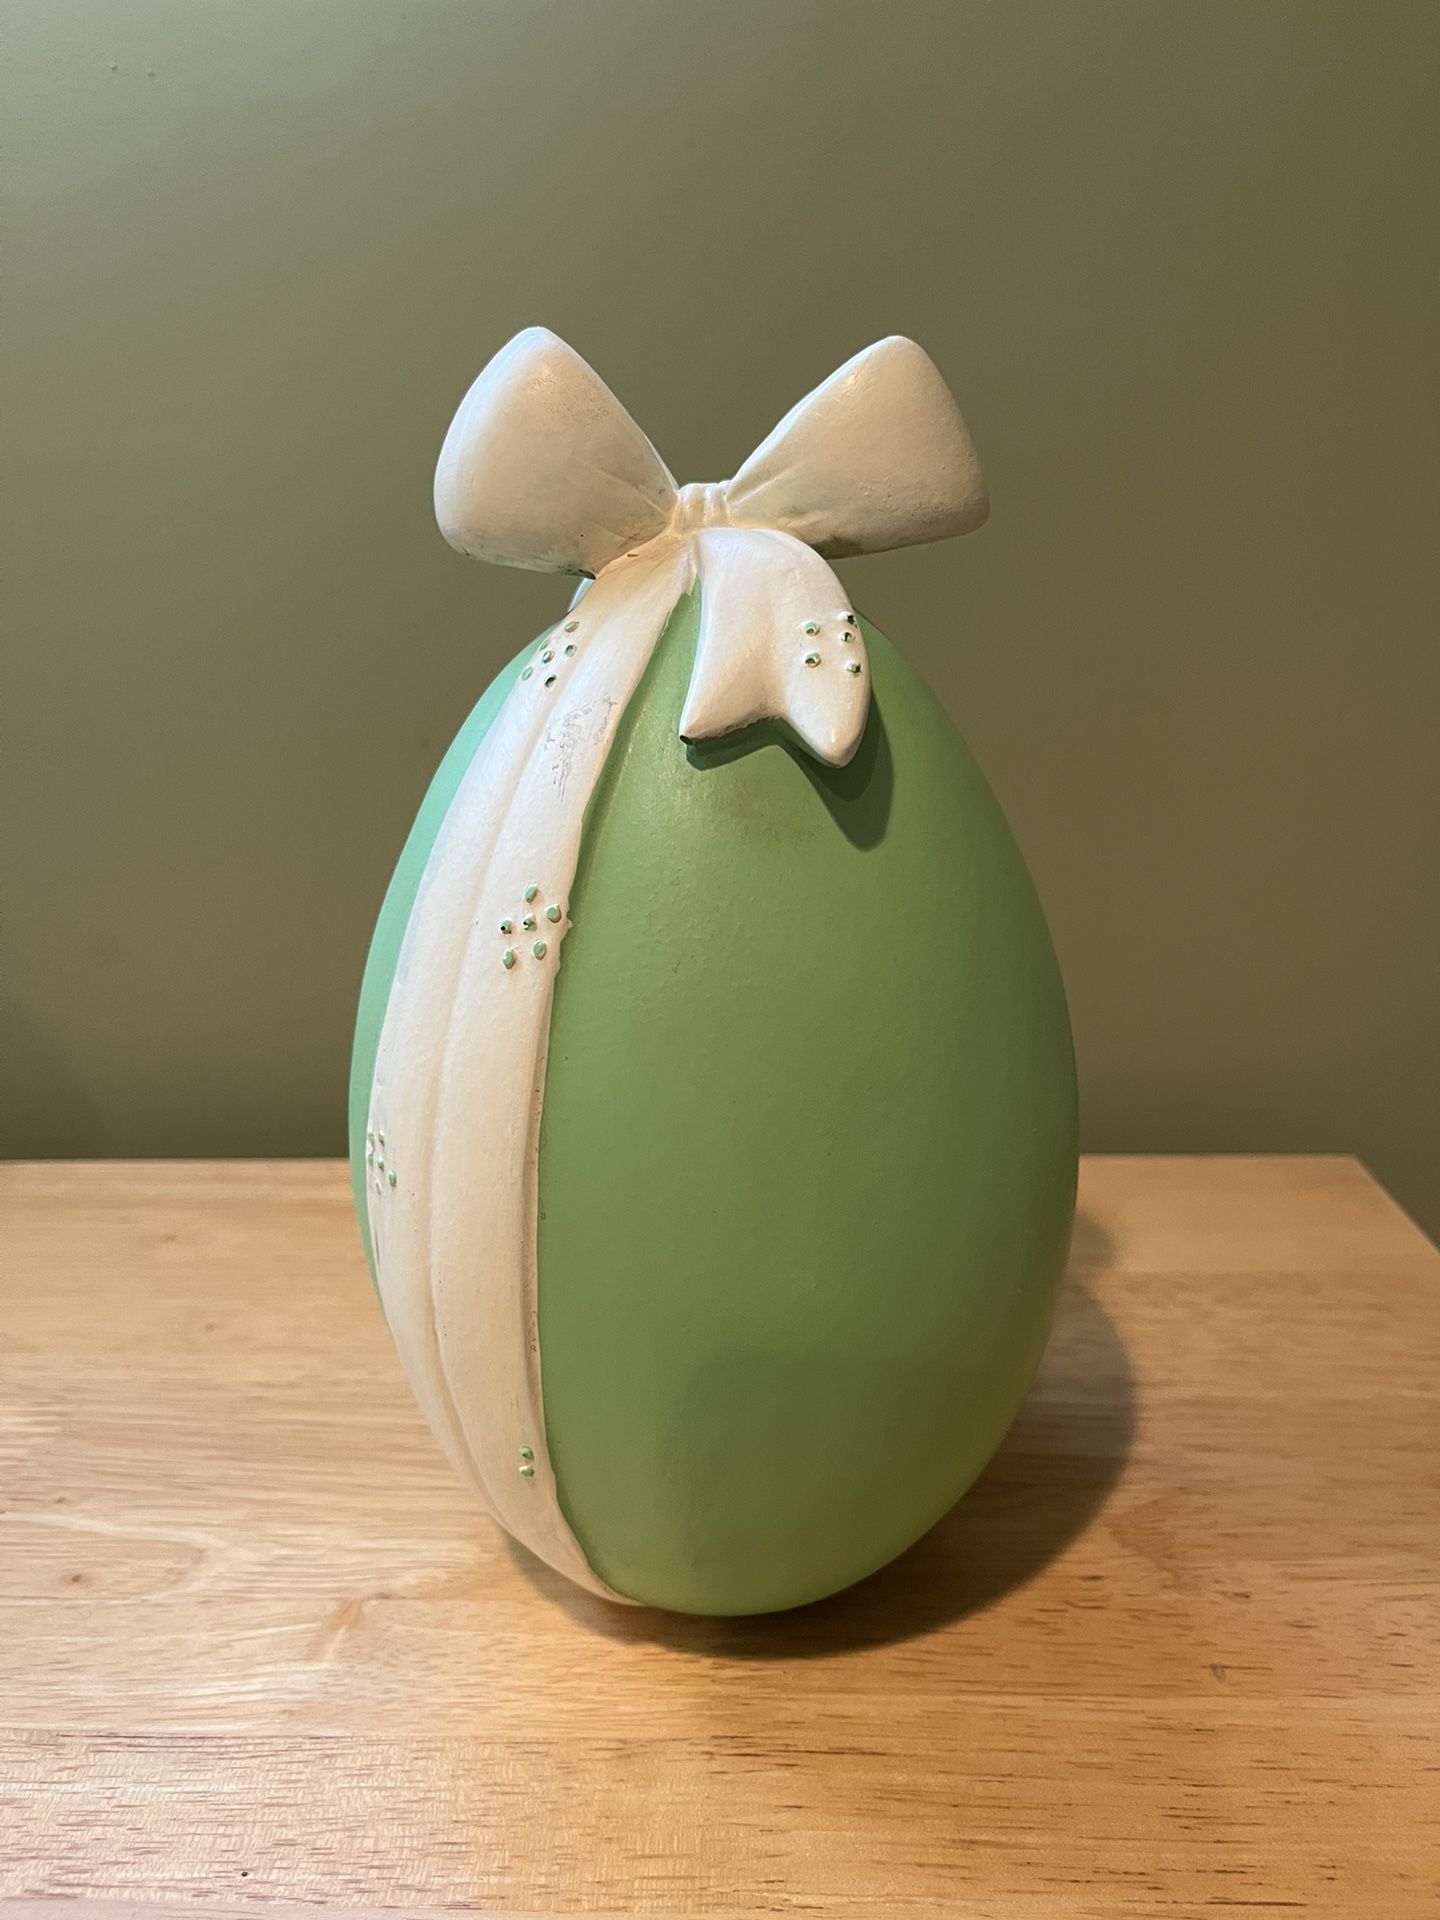 Ceramic Easter Egg with Bow (green) 